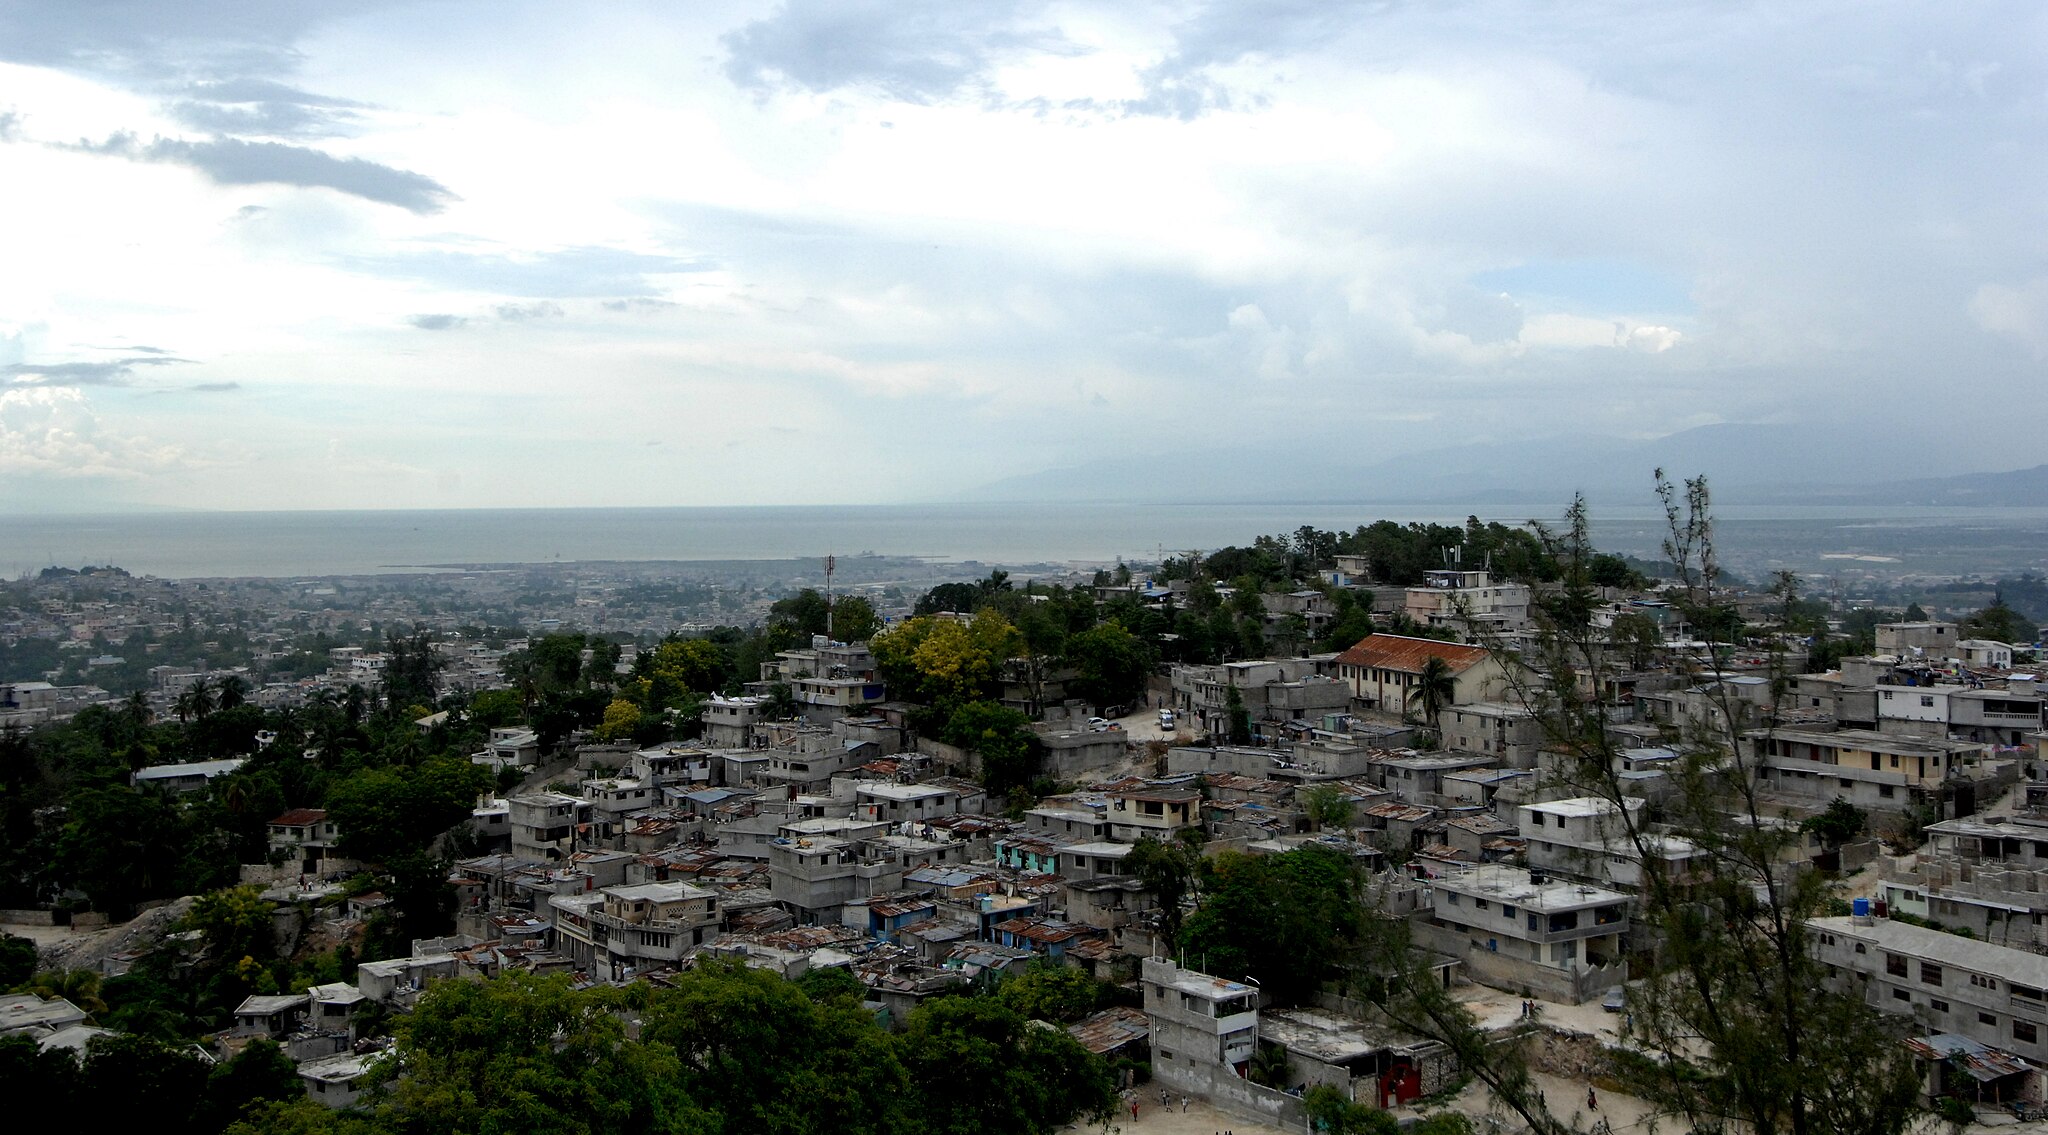 Haiti government extends state of emergency following increasing gang violence